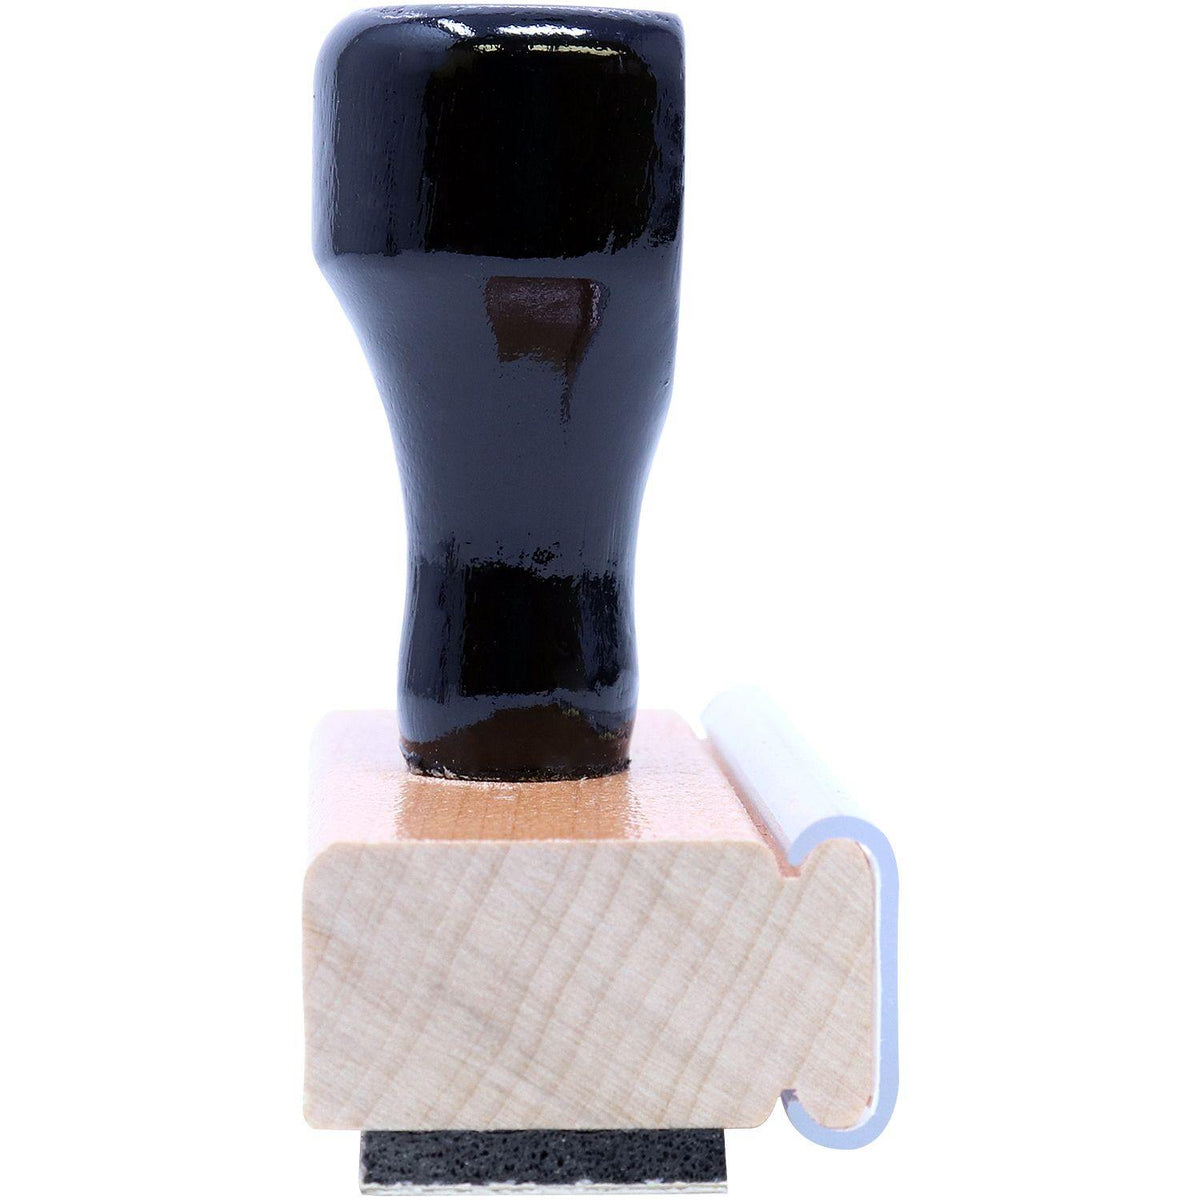 Large Validated Rubber Stamp - Engineer Seal Stamps - Brand_Acorn, Impression Size_Large, Stamp Type_Regular Stamp, Type of Use_Office